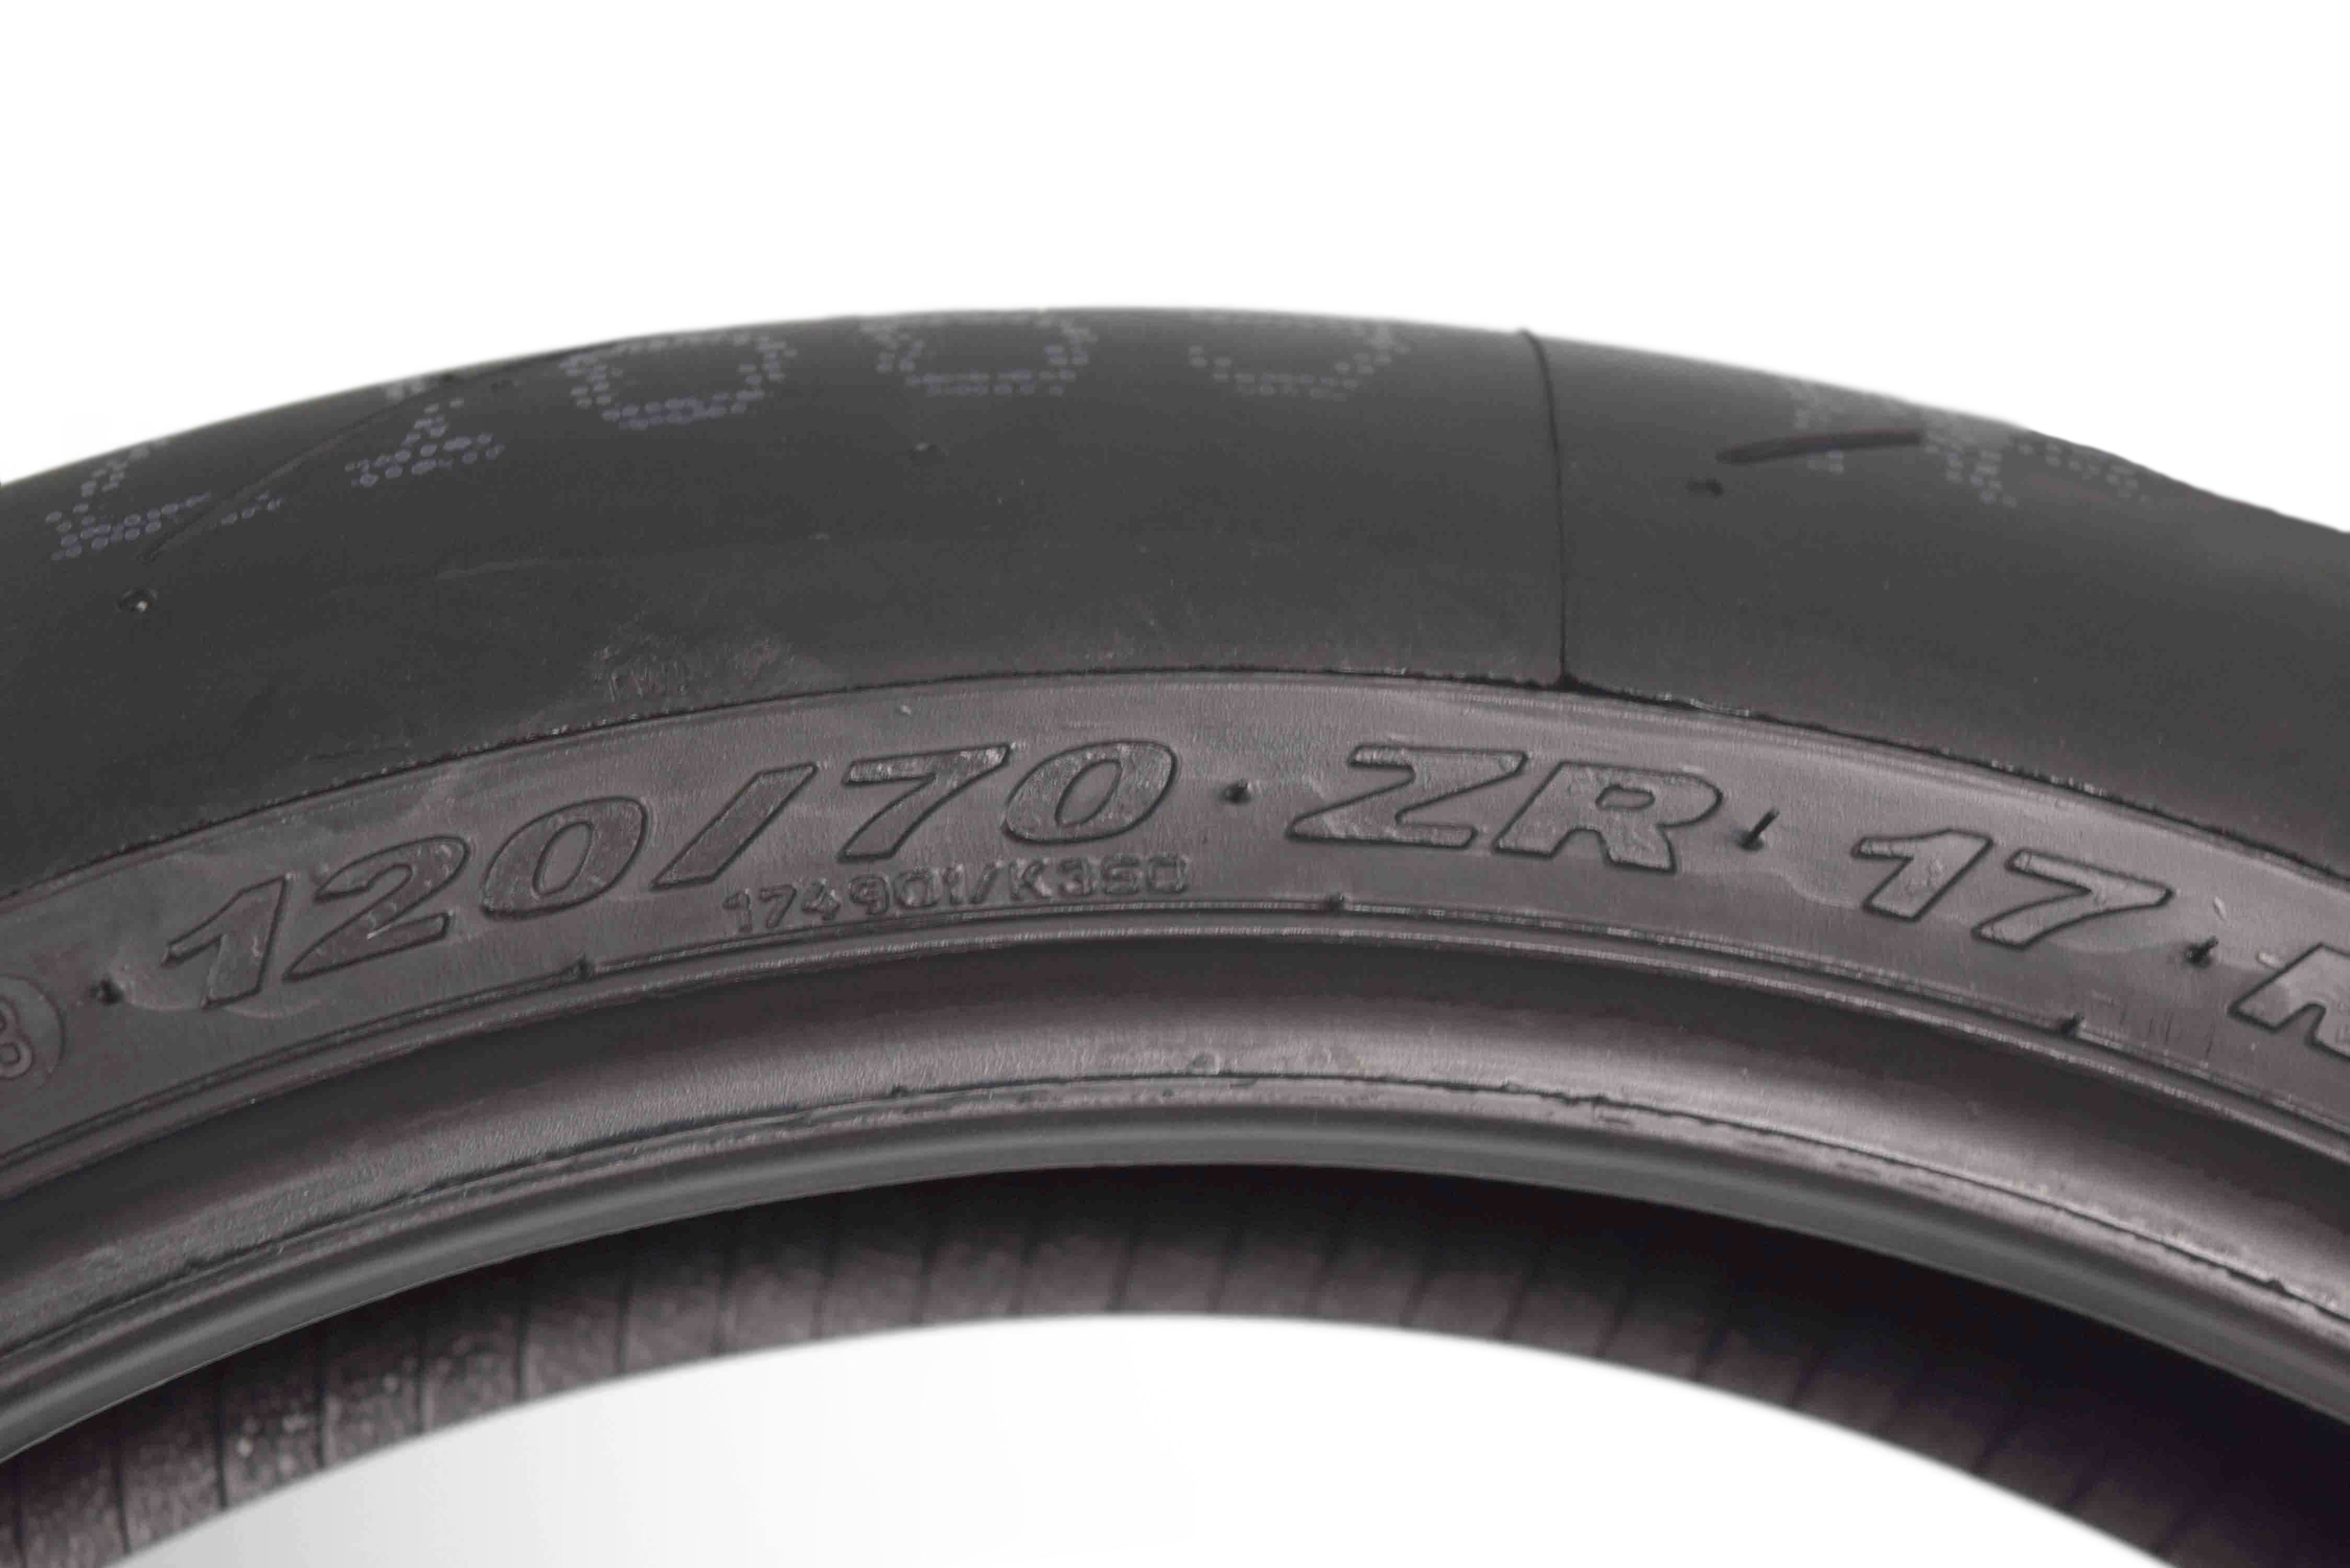 Pirelli Tire 120/70ZR17 SUPER CORSA V2 Radial Motorcycle Front Tire 120/70-17